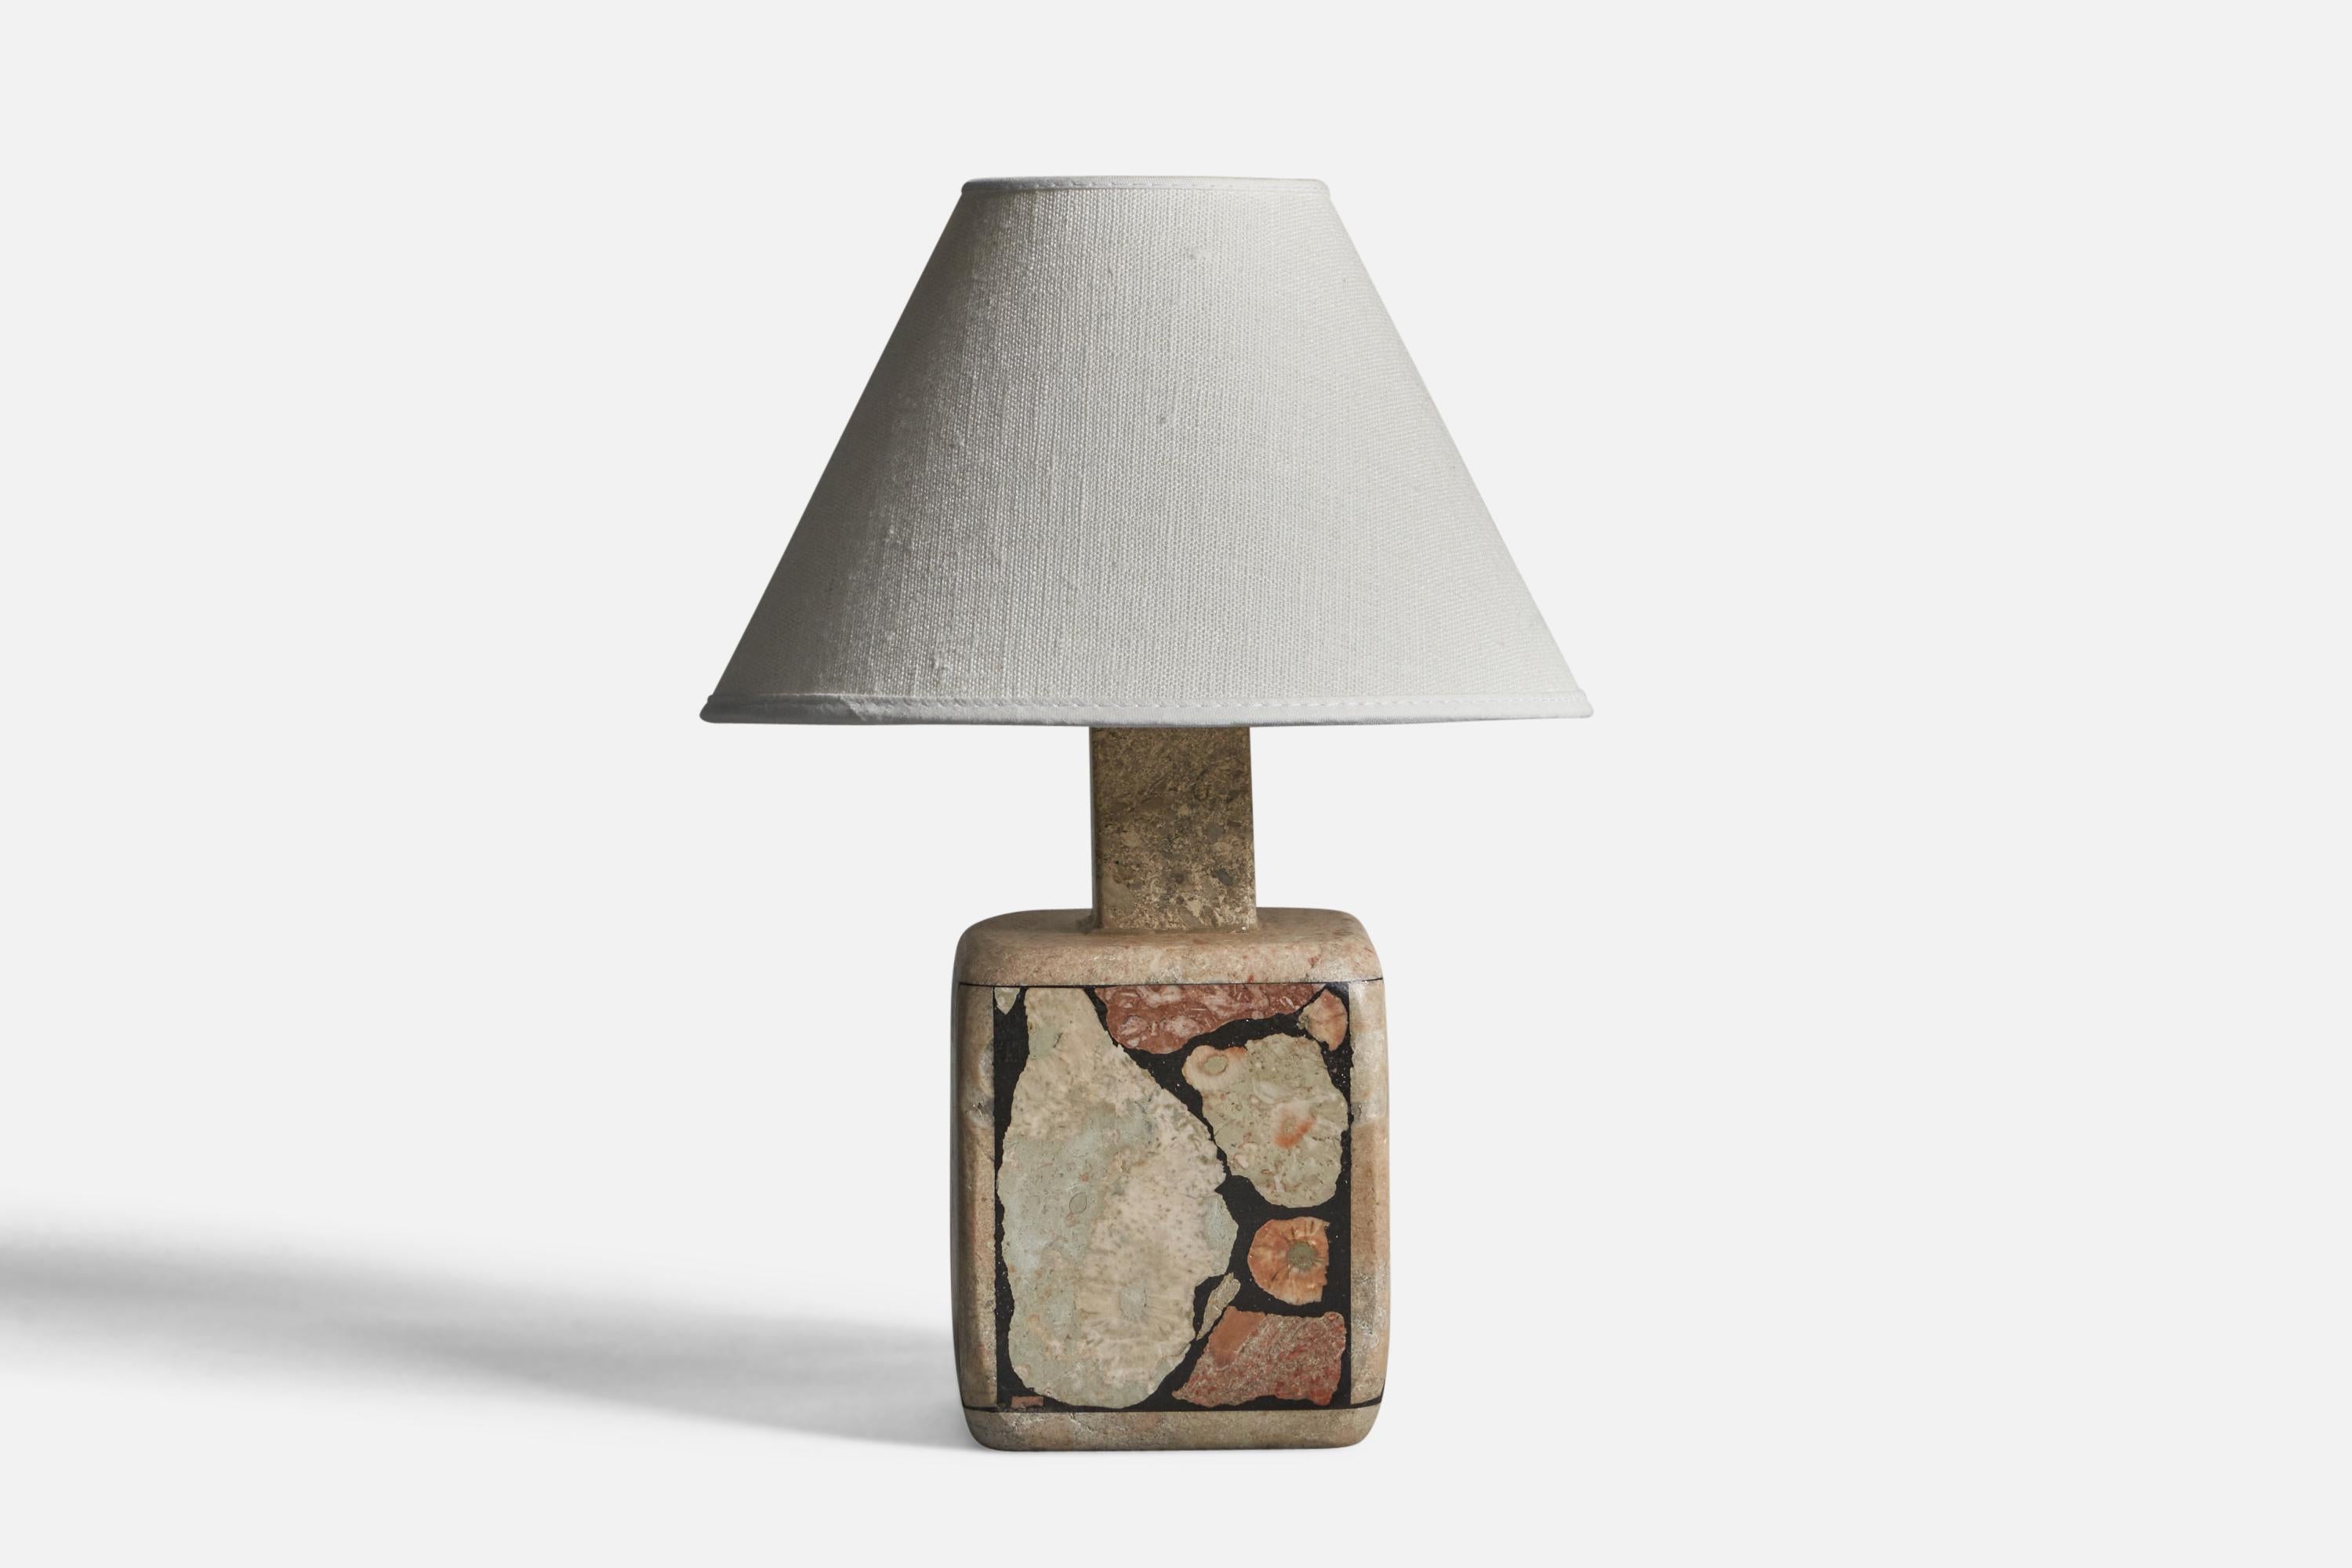 A fossil stone table lamp designed and produced in Gotland, Sweden, 1970s.

Dimensions of Lamp (inches): 9.15